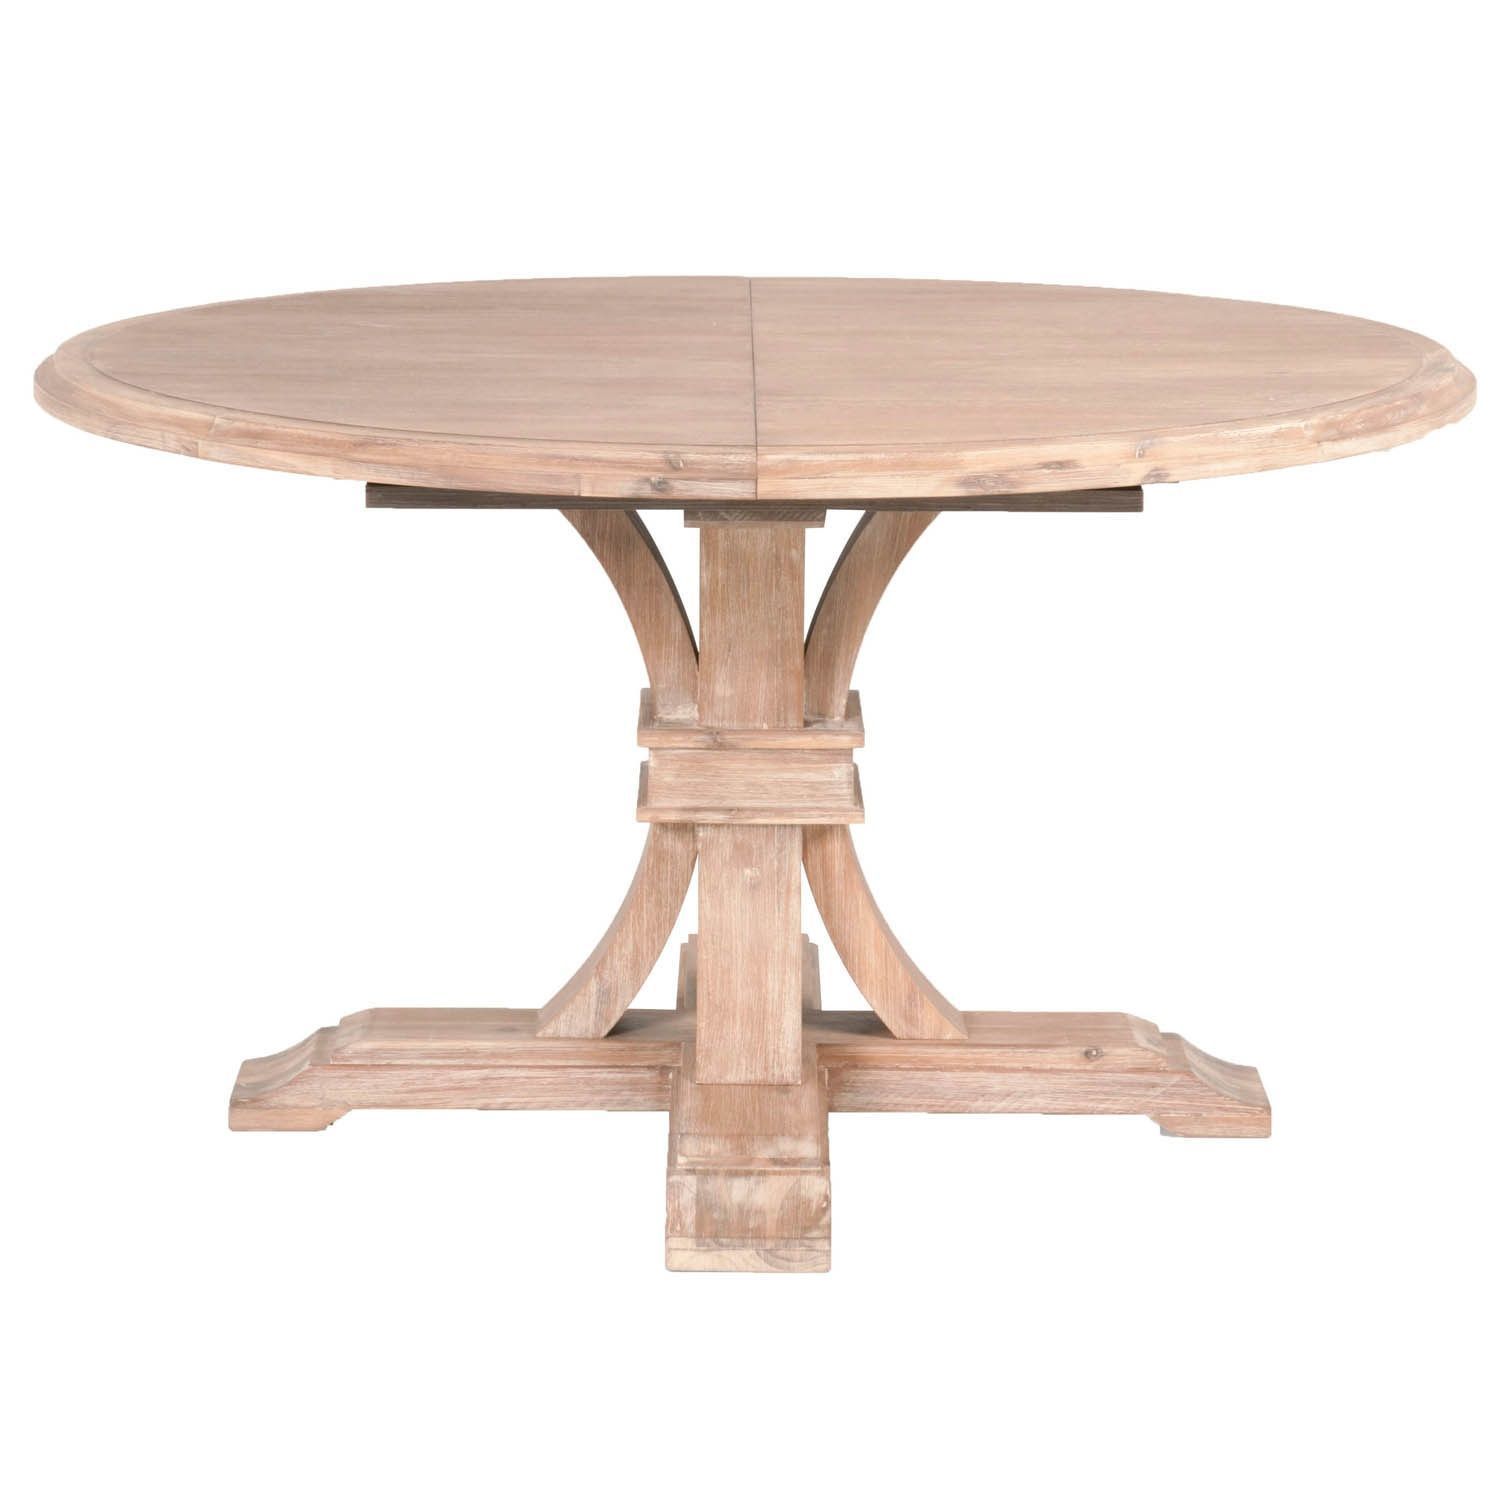 Darby Stone Wash Round Extension Dining Table (Stone Wash Pertaining To Newest Gray Wash Toscana Extending Dining Tables (View 6 of 25)